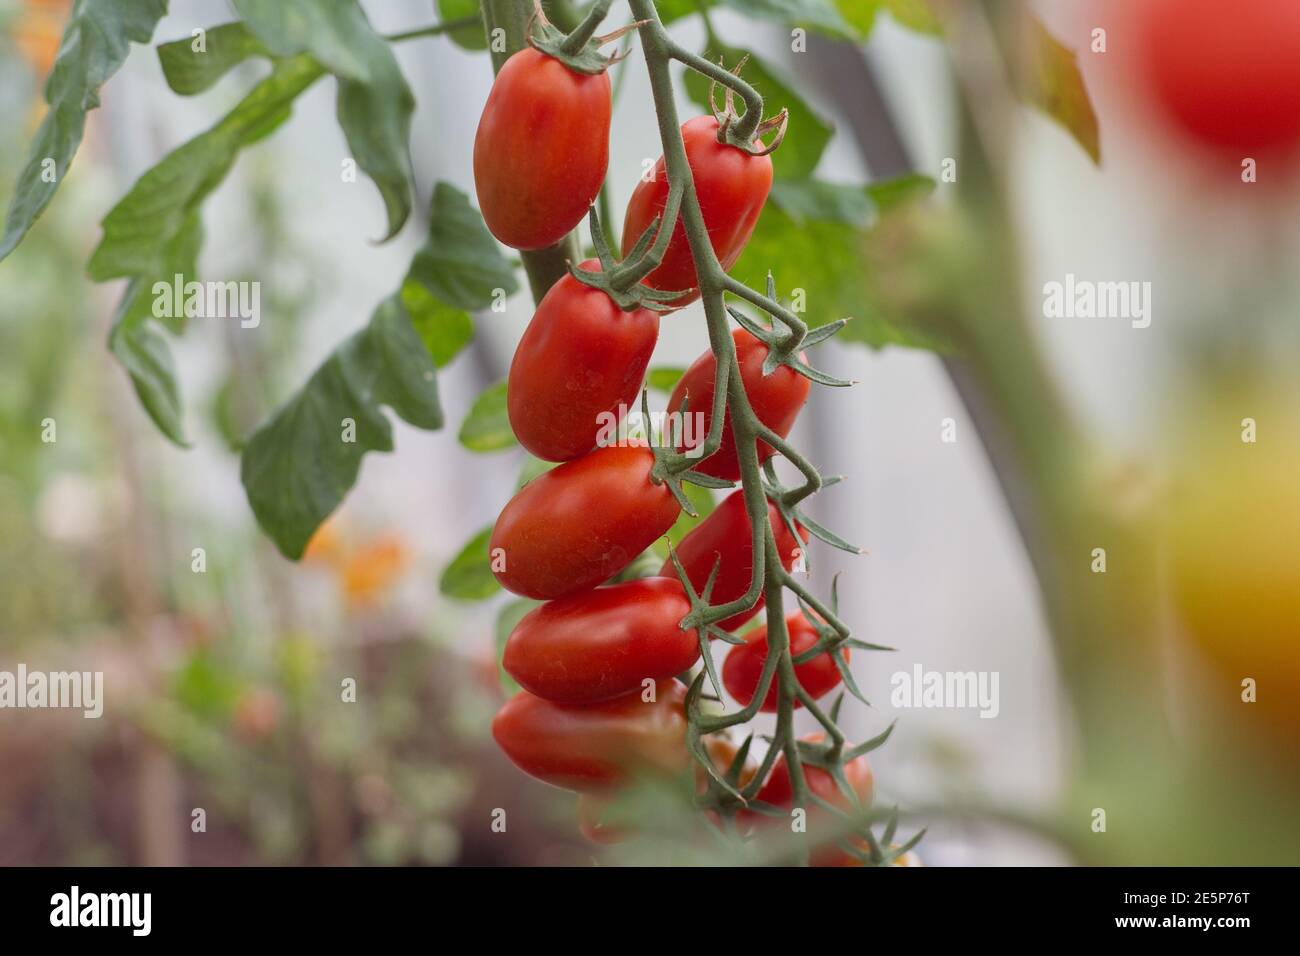 A bunch of cherry tomatoes on a plant in a greenhouse Stock Photo